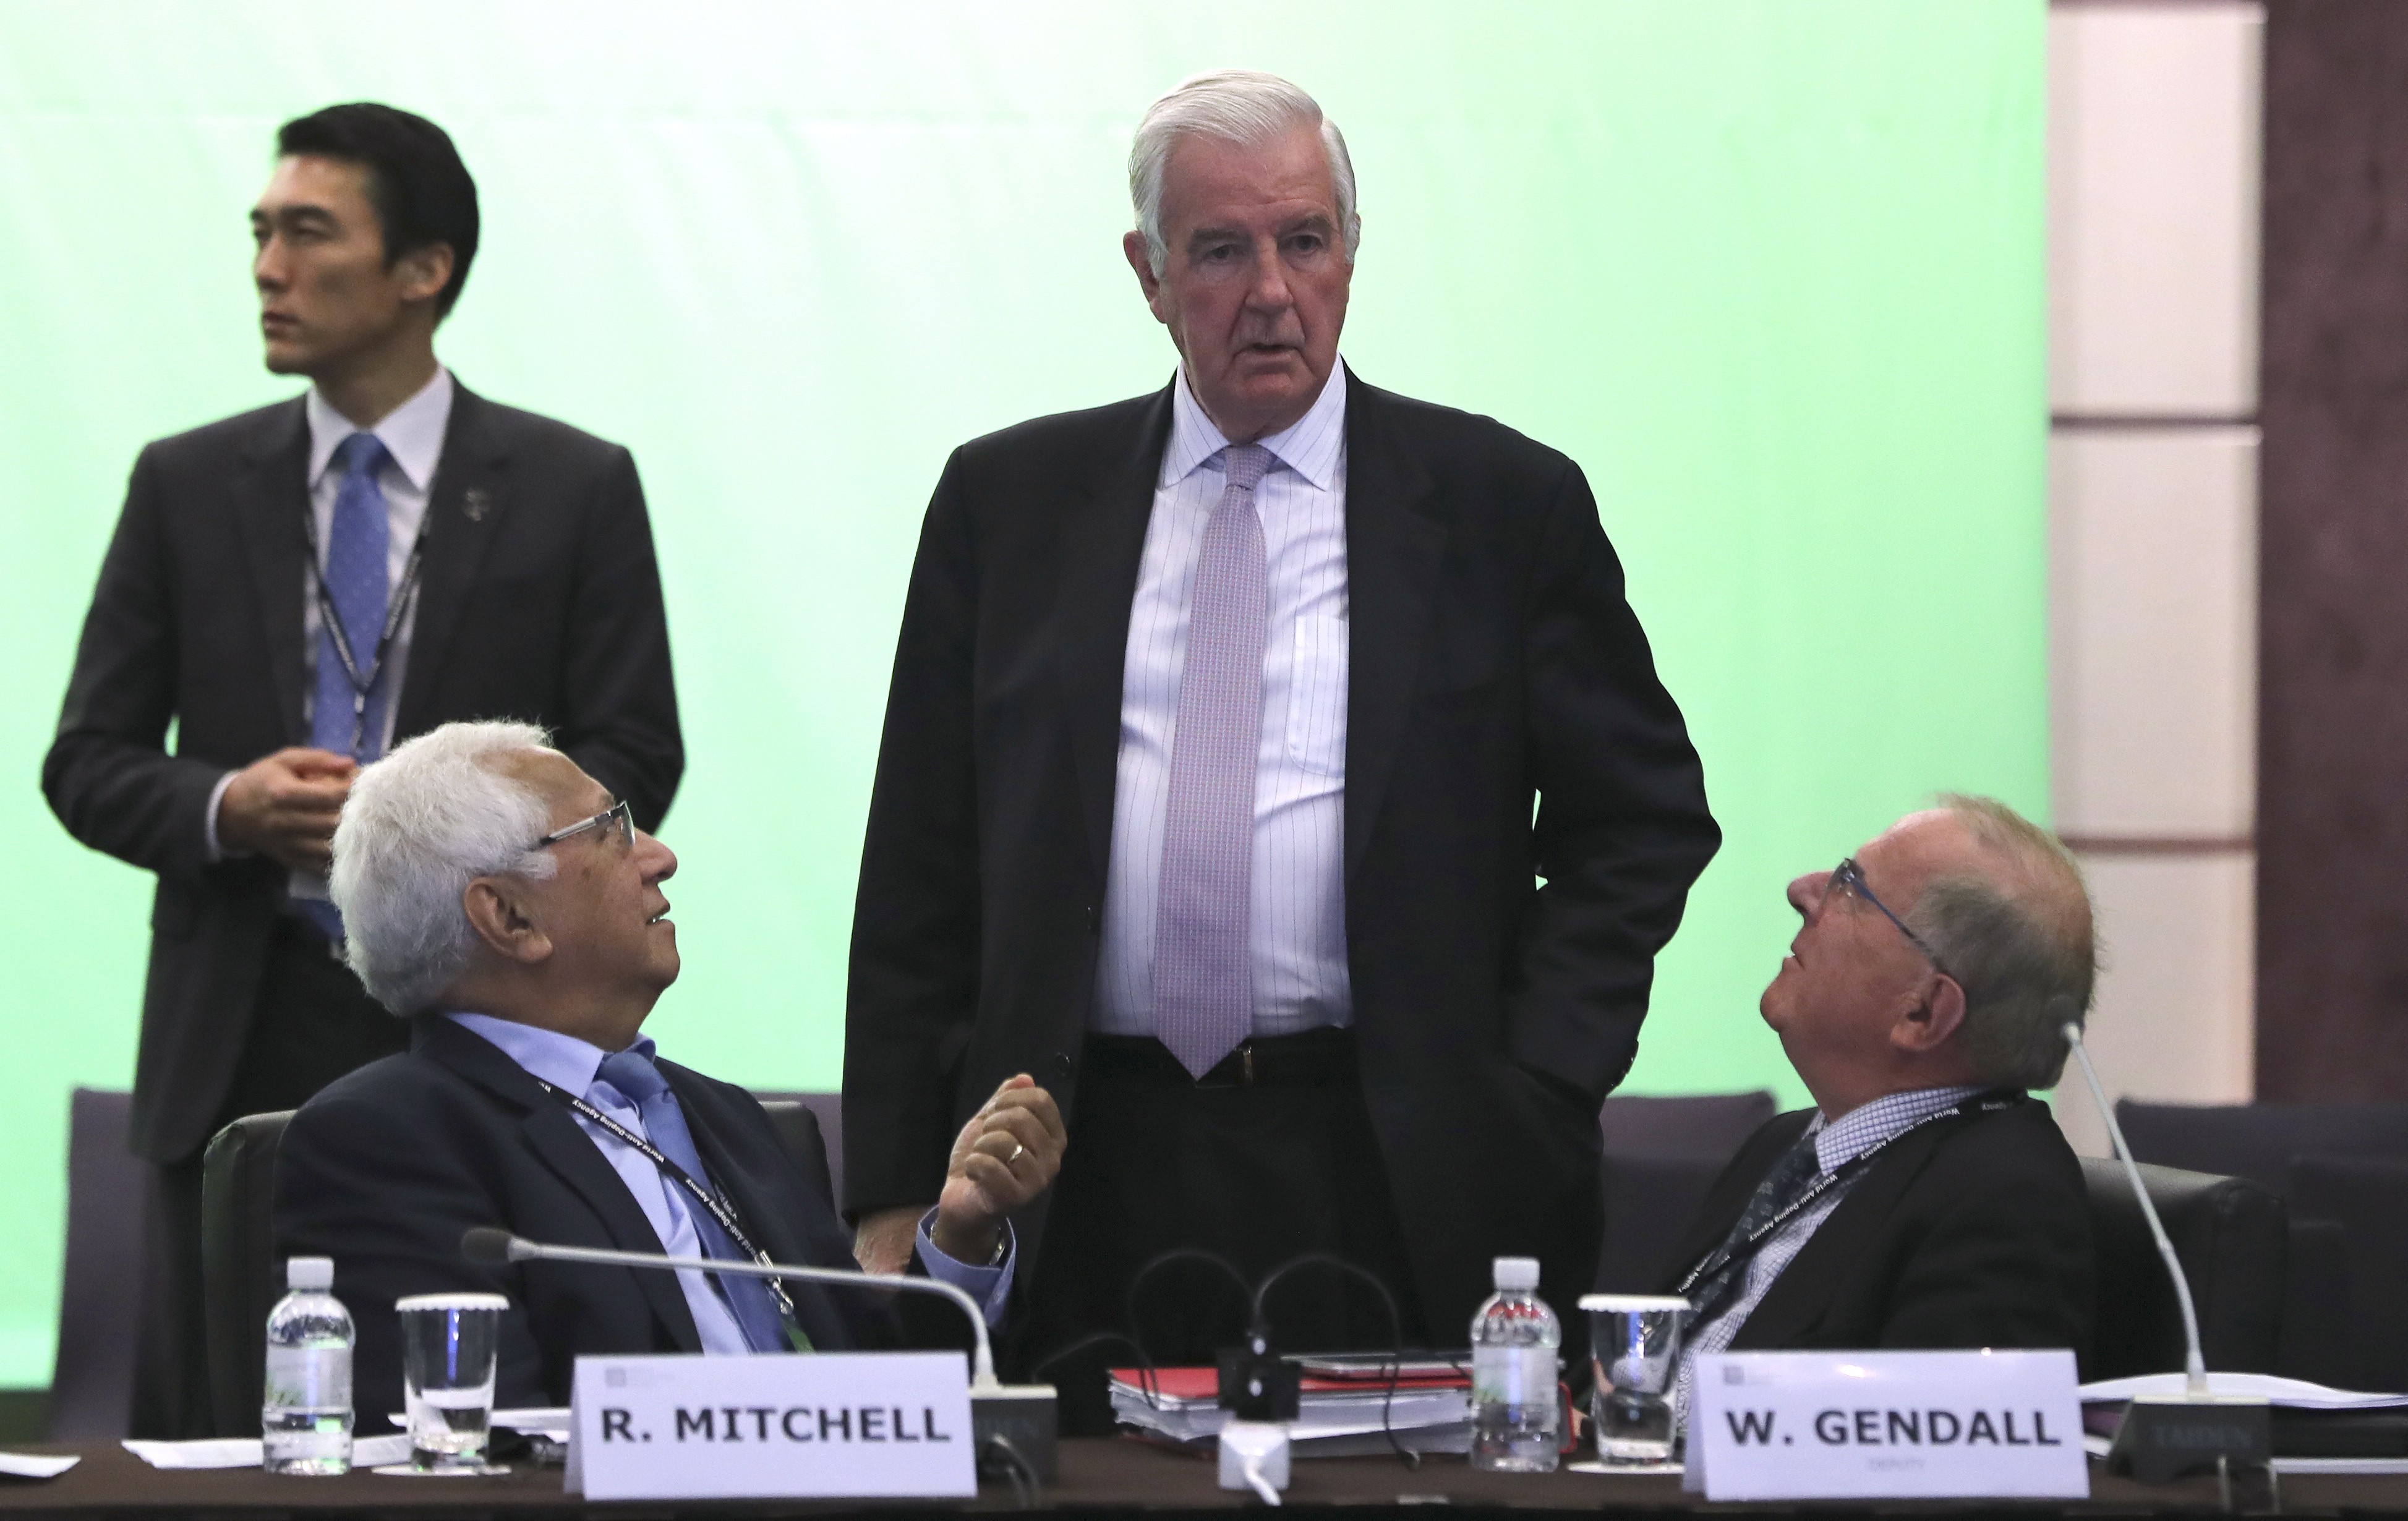 World Anti-Doping Agency (Wada) President Craig Reedie, centre, talks with IOC member Robin Mitchell (L) and Drug-Free Sport New Zealand Board Chair Warwick Gendall (R) before the start of Wada’s foundation board meeting in Seoul, South Korea, on Thursday, November 16, 2017. Photo: AP